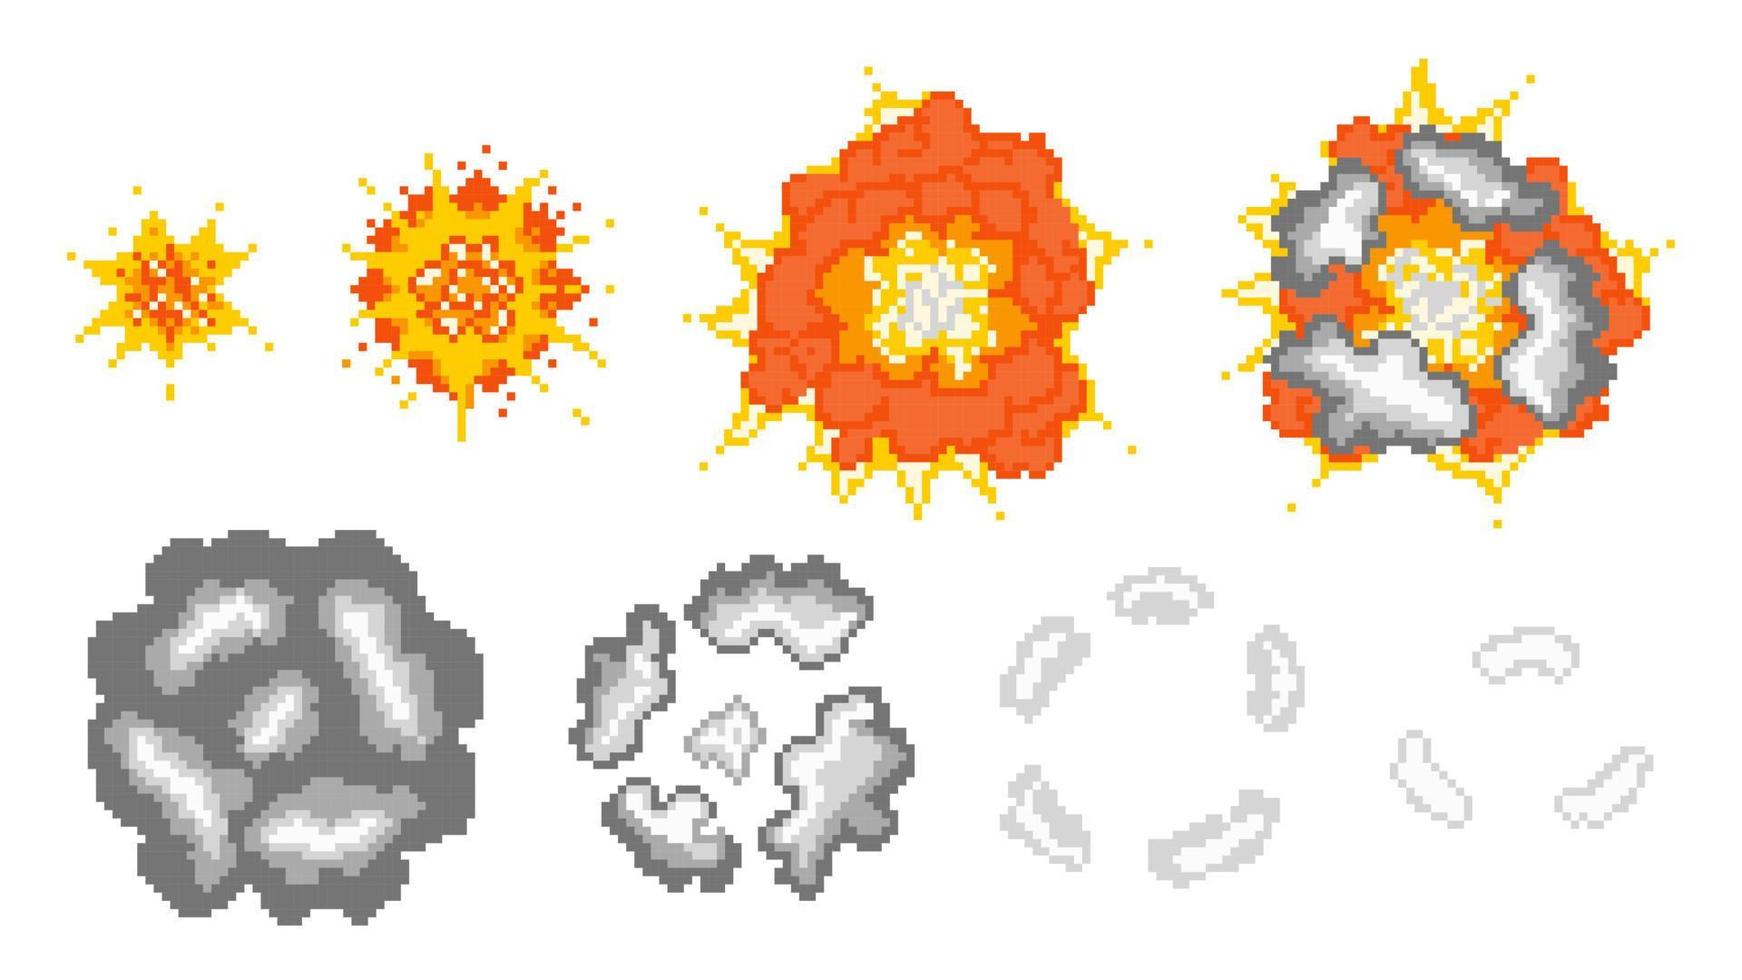 Stages destructive pixel explosion illustration. Initial flash increase in fireball and red powerful detonation with smoke dispersion and disappearance vector gray clouds